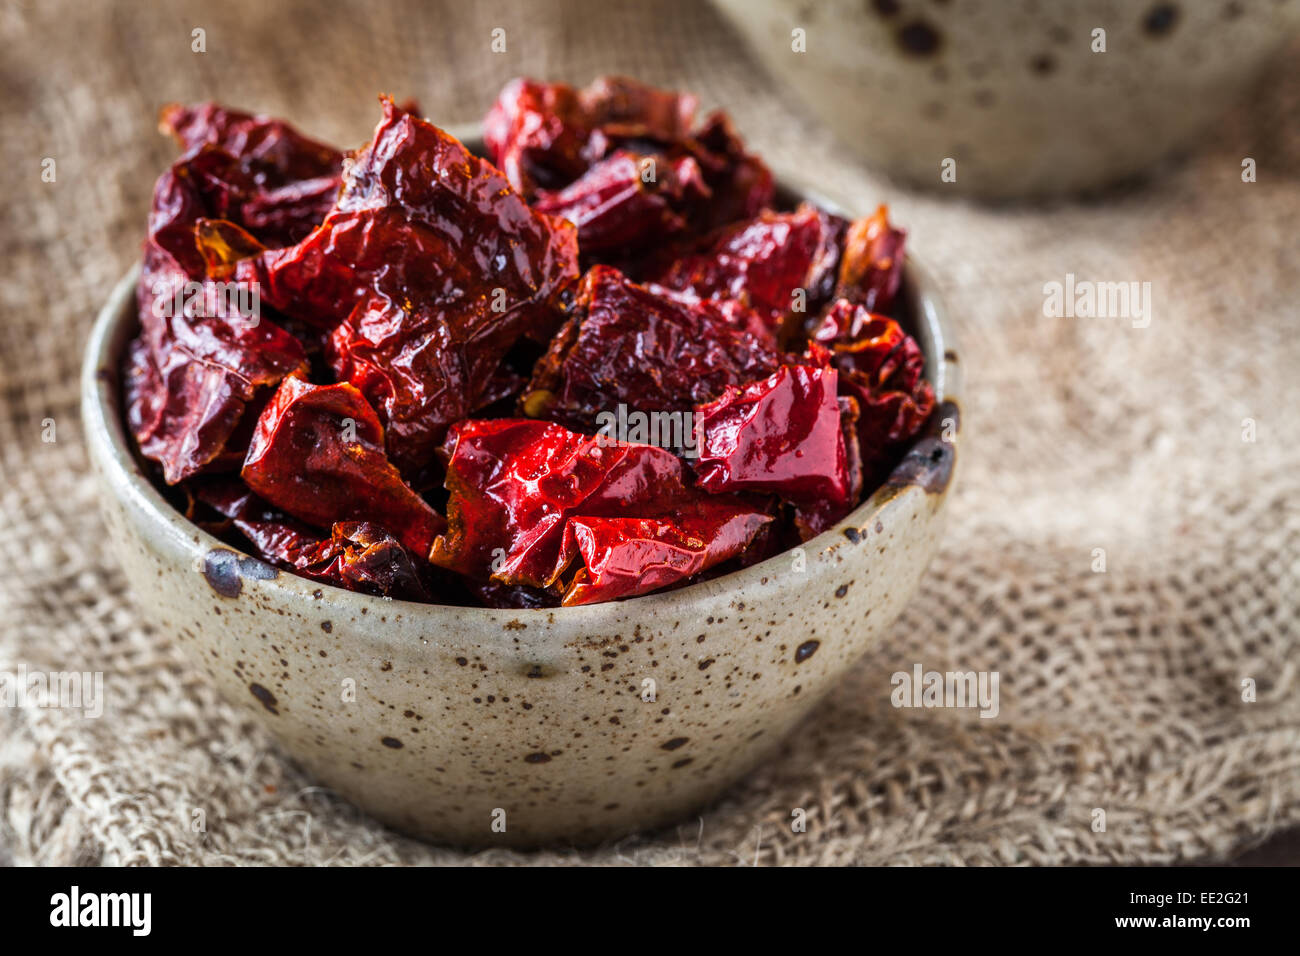 Typical fried red peppers from Matera in Basilicata region, Italy Stock Photo